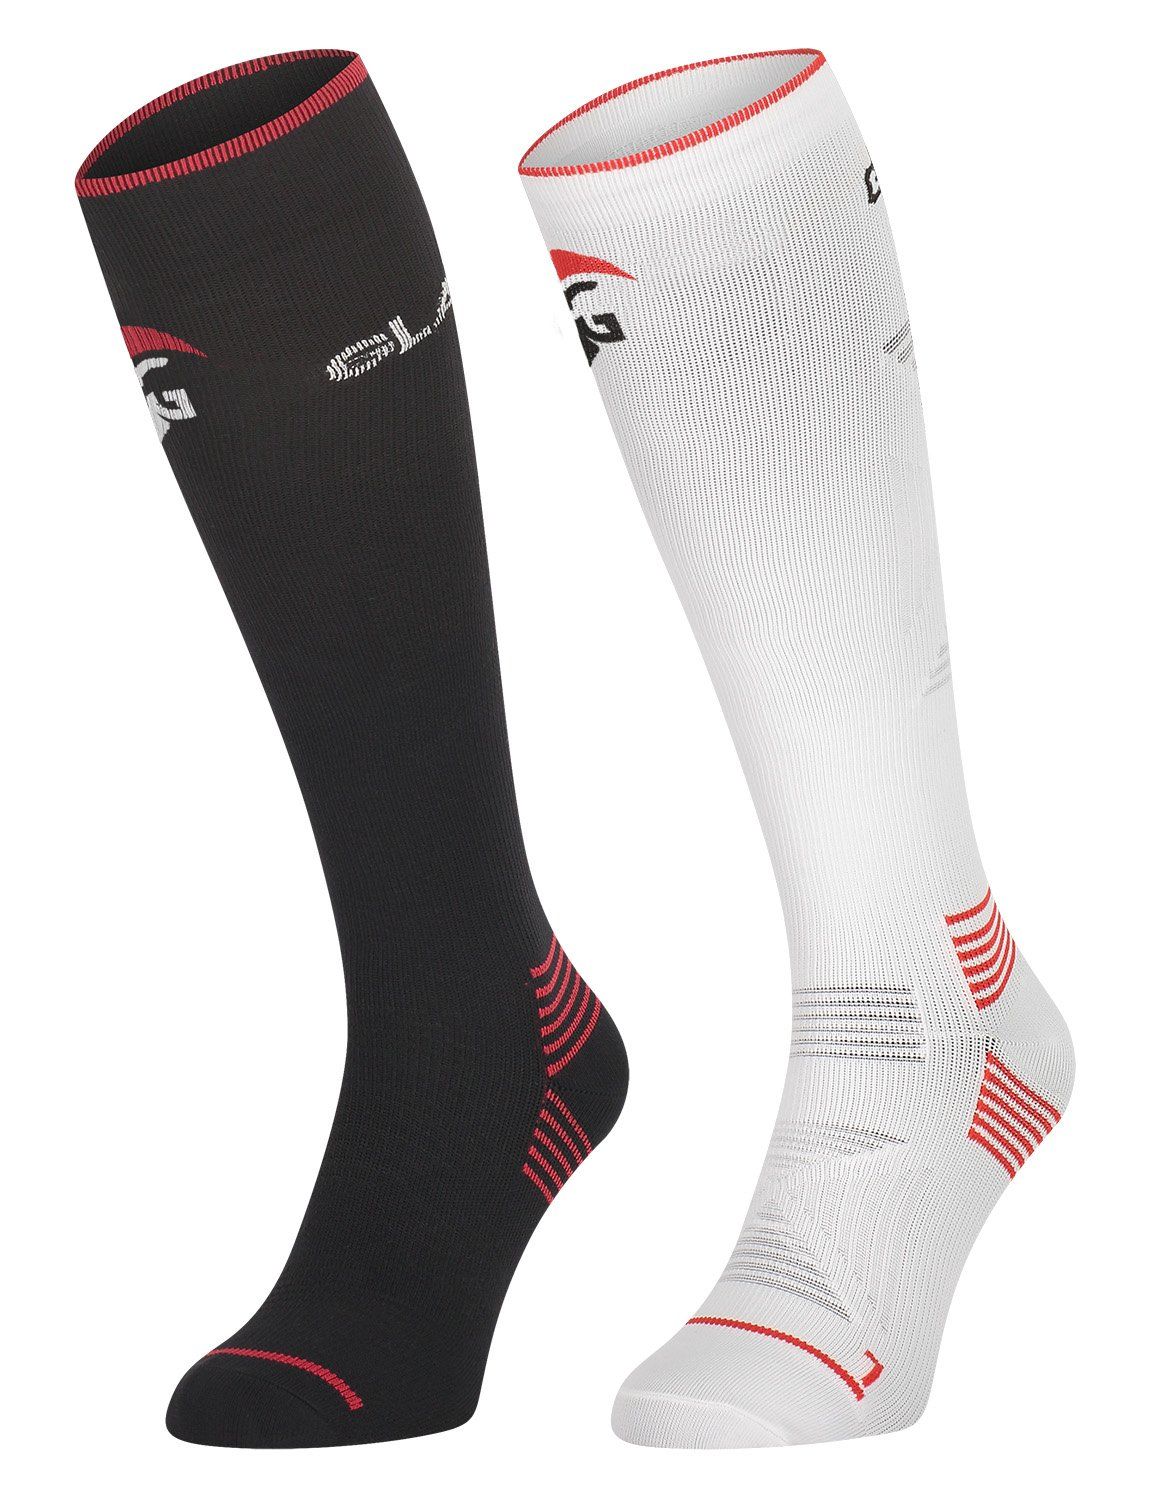 gladiator sports running stockings for sale